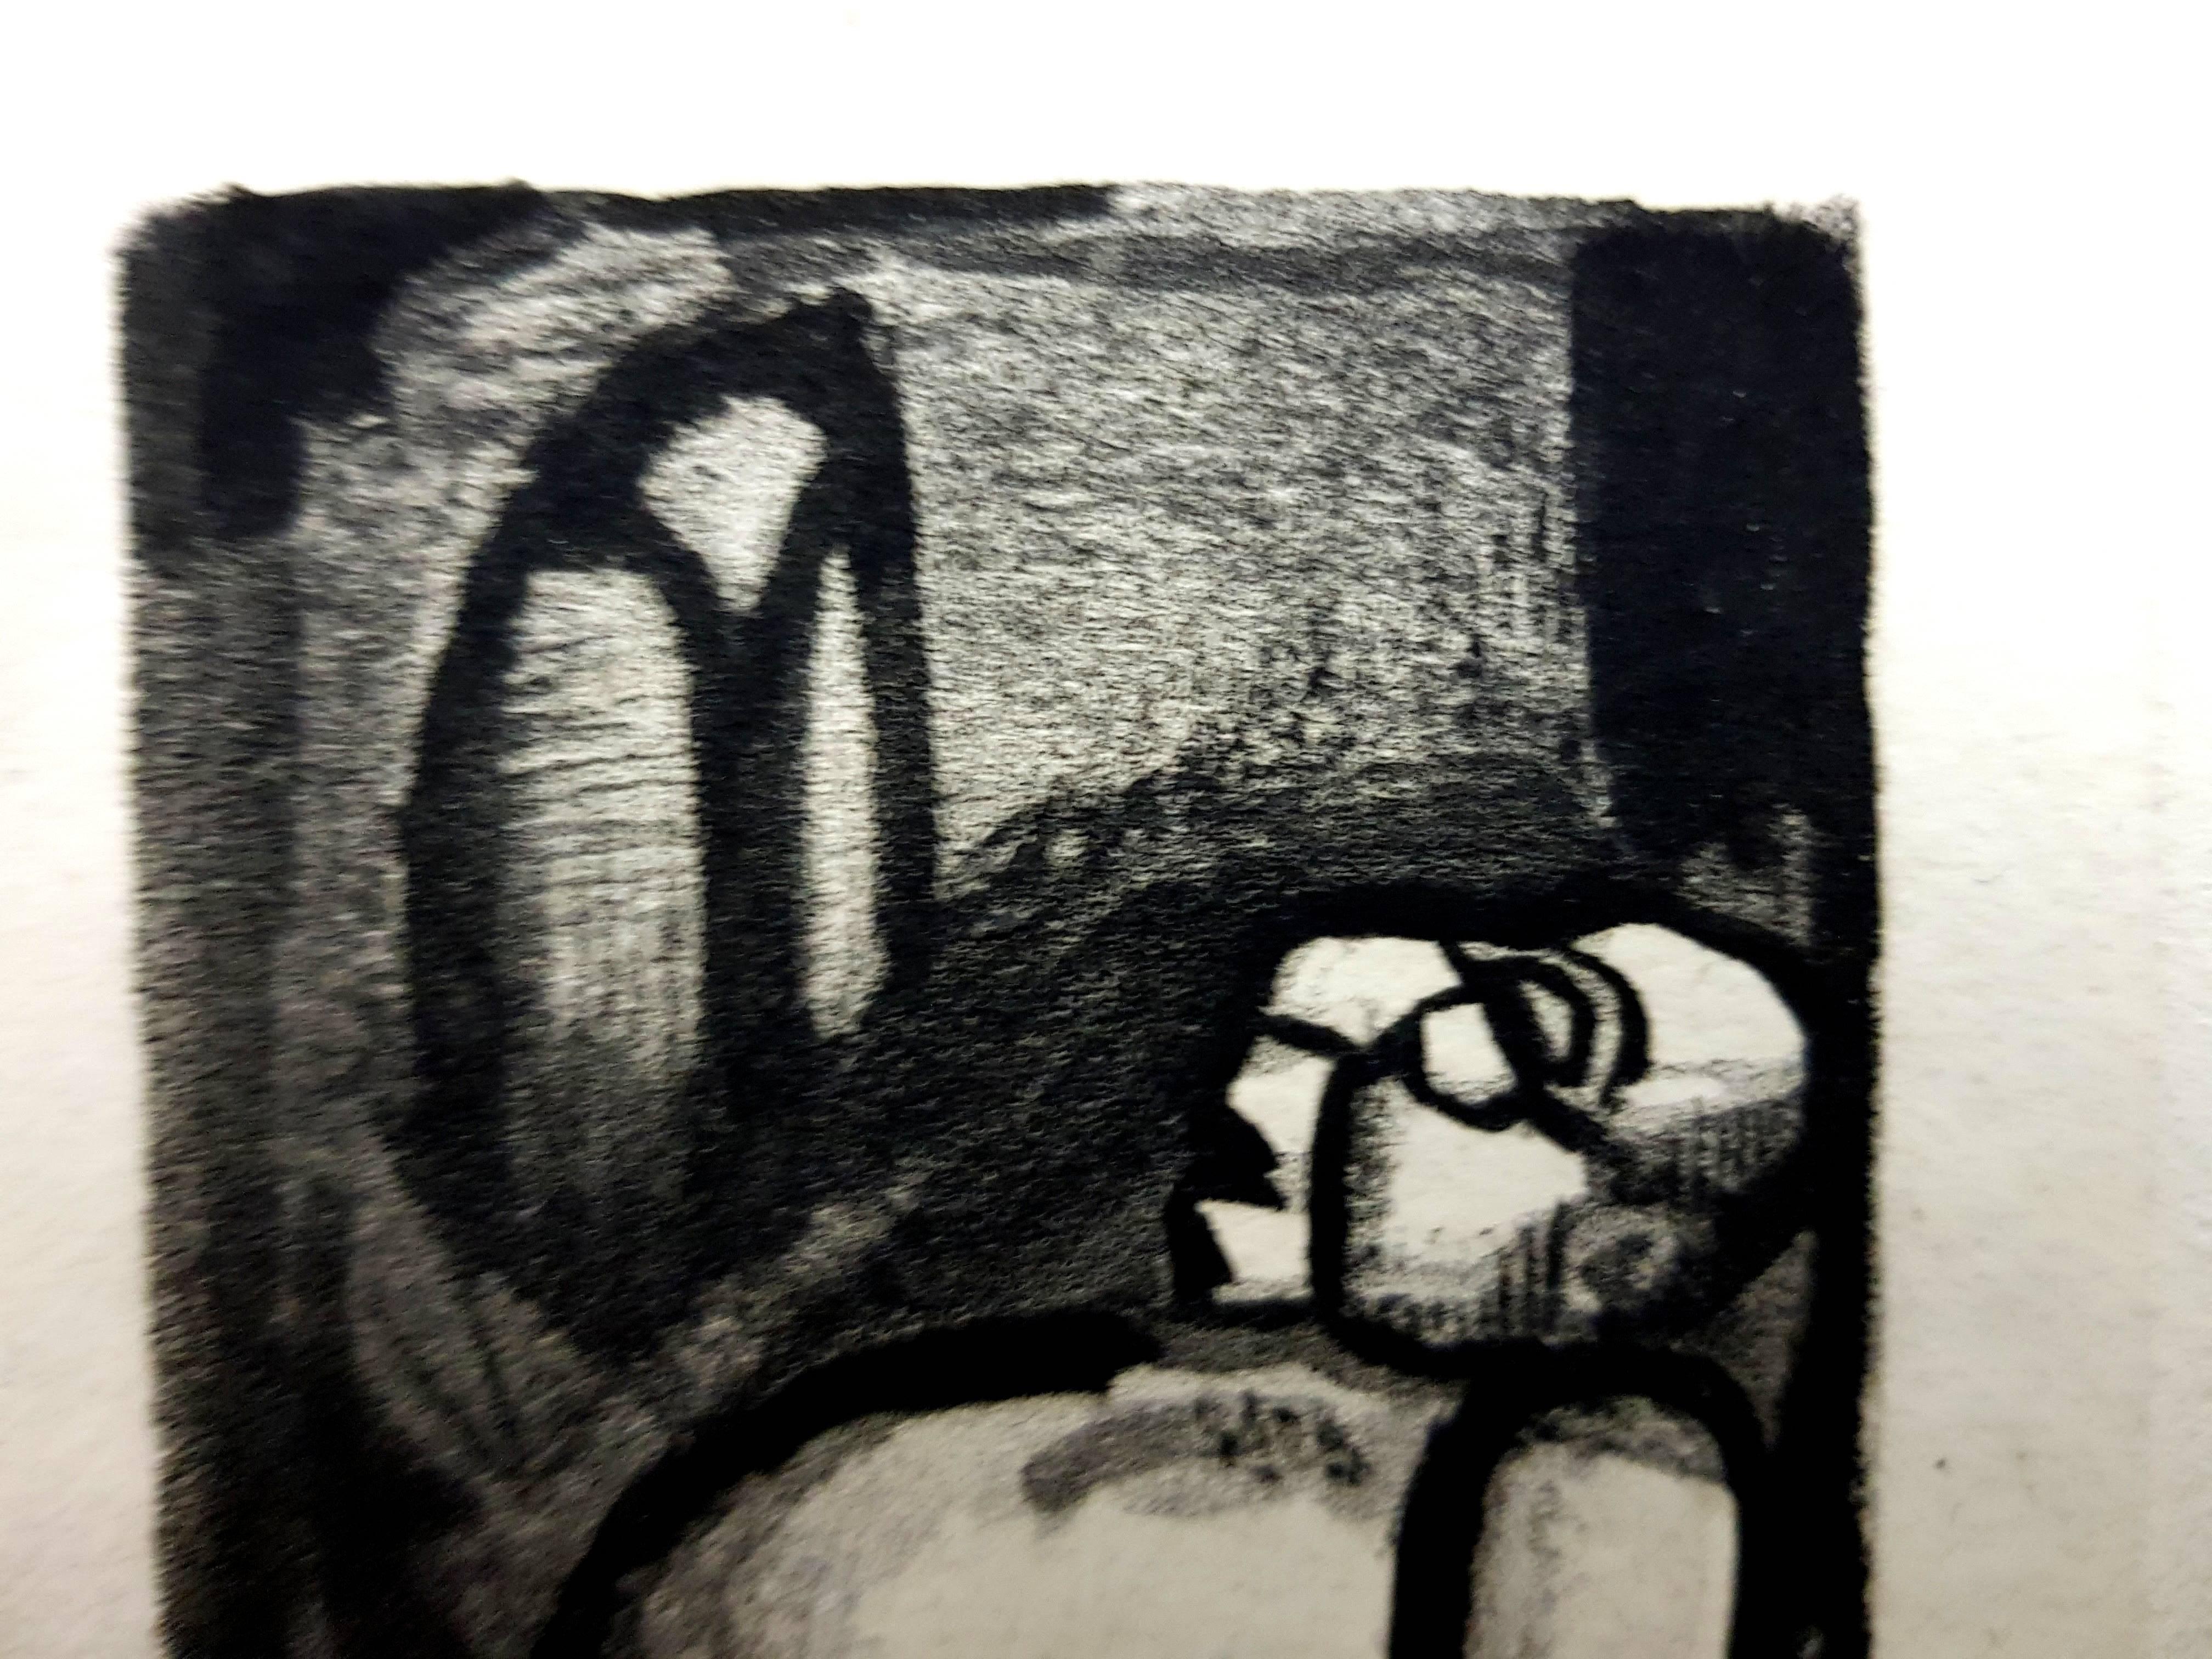 Georges Rouault - Original Engraving - Ubu the King
Paper : Vélin
Signed in the plate
Edition: 210
Dimensions : 29 x 21.5 cm
Very Good Condition
Ambroise VOLLARD, Paris 1955

Georges Rouault (1871 - 1958)

Georges Henri Rouault was born in Paris on